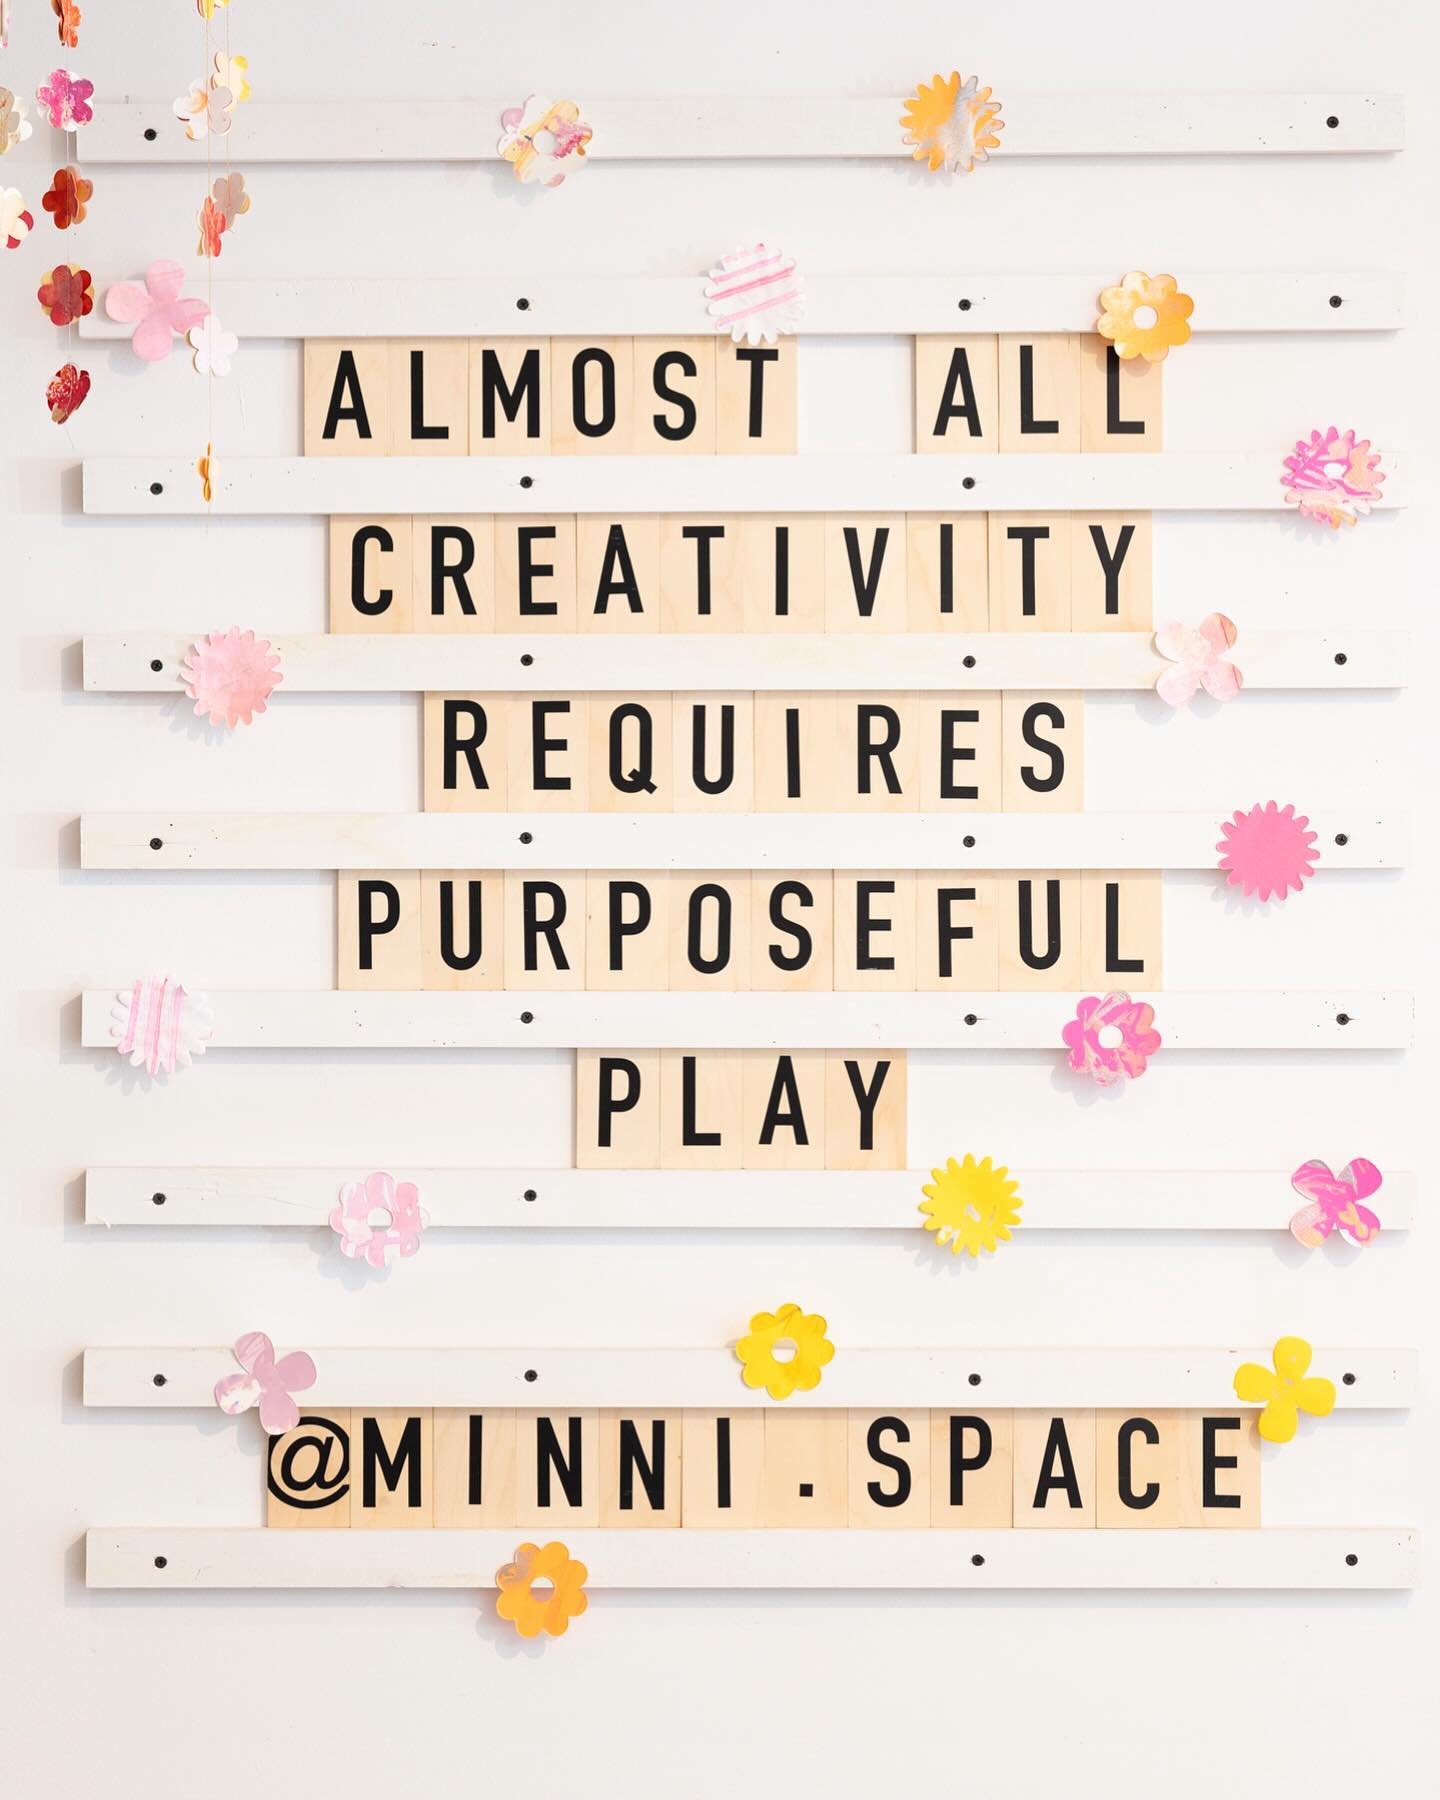 At Minni we work in purposeful playtime into all our classes and programs to develop your little artist(s) creativity, and encourage self exploration in art. 

If this sounds like something you want to be a part of, come join our Summer Program or ex